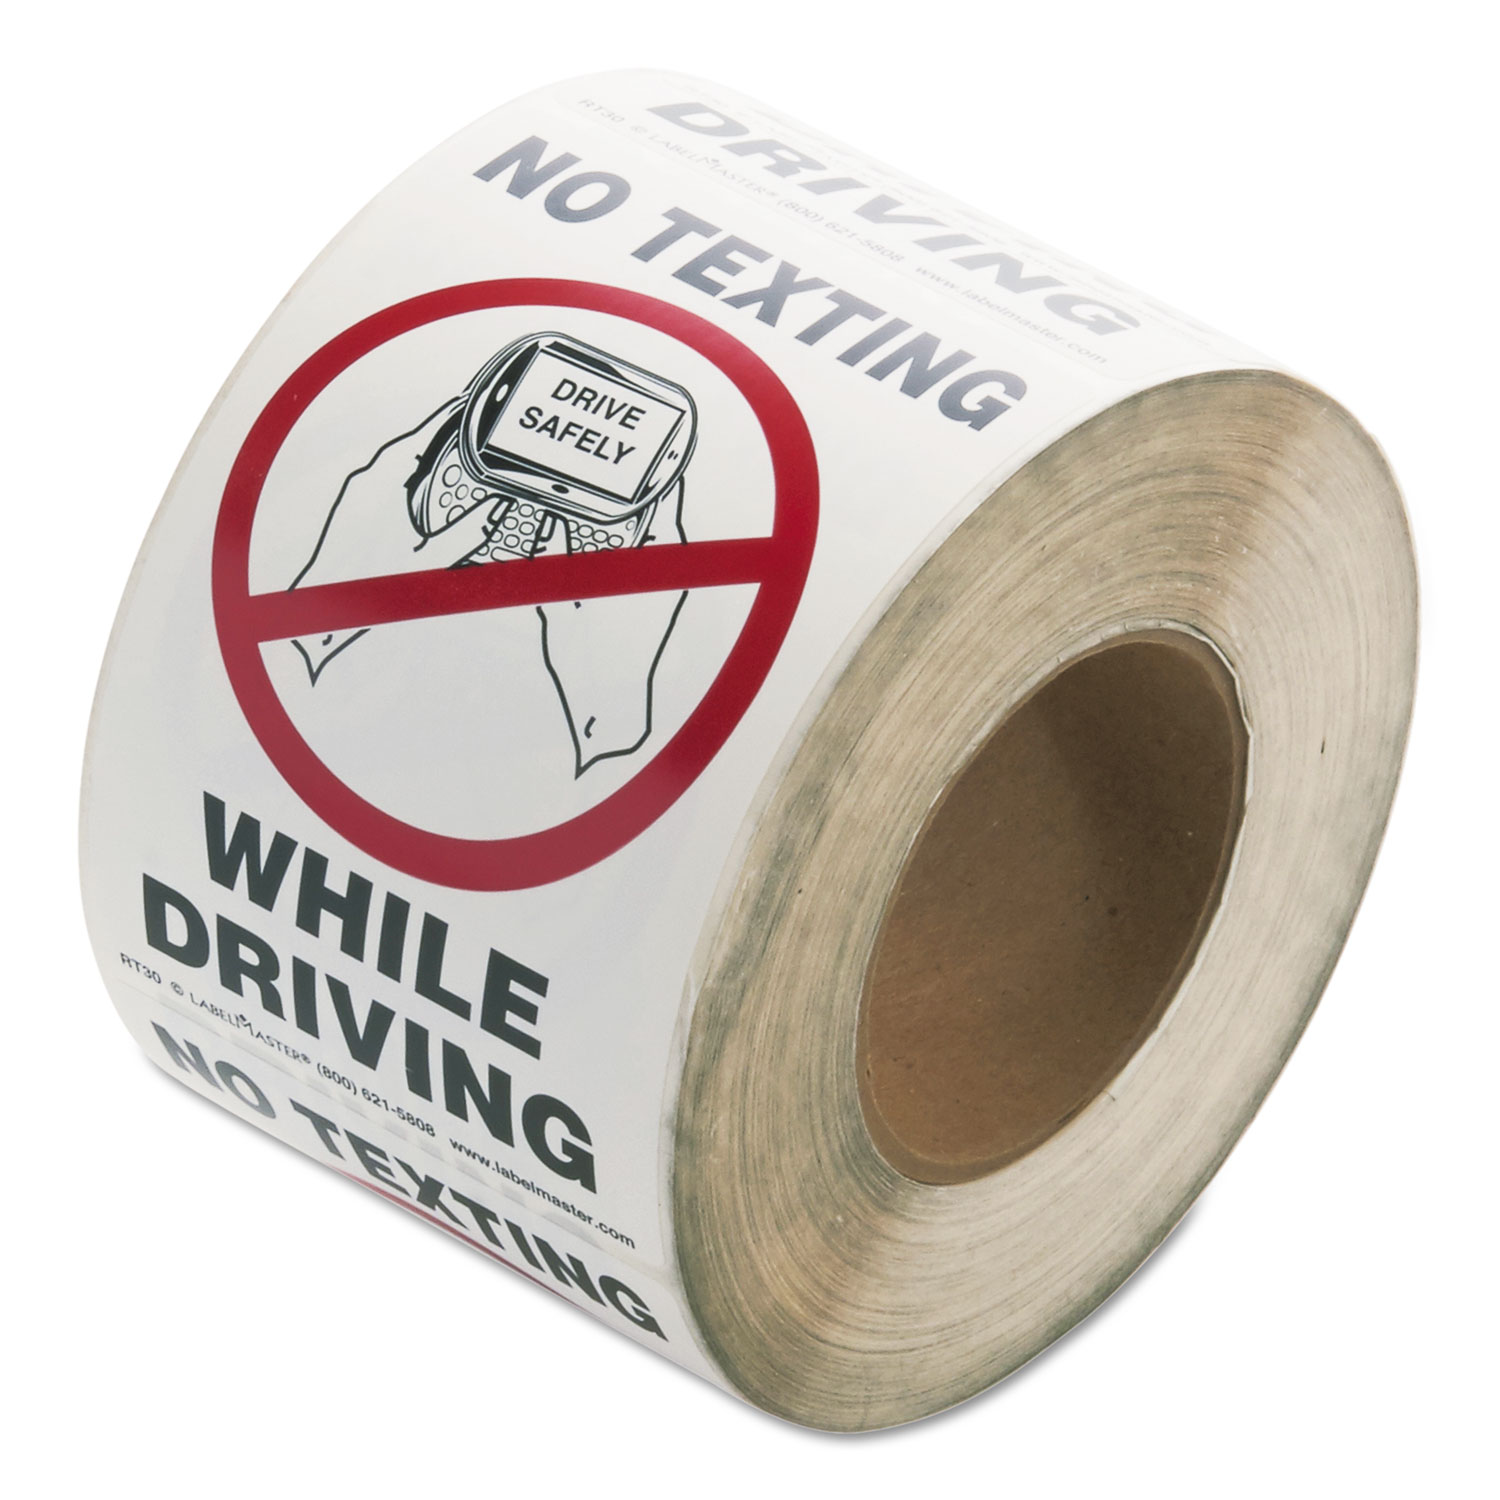 Self-Adhesive Label, 6 1/2 x 4 1/2, NO TEXTING WHILE DRIVING, 500/Roll